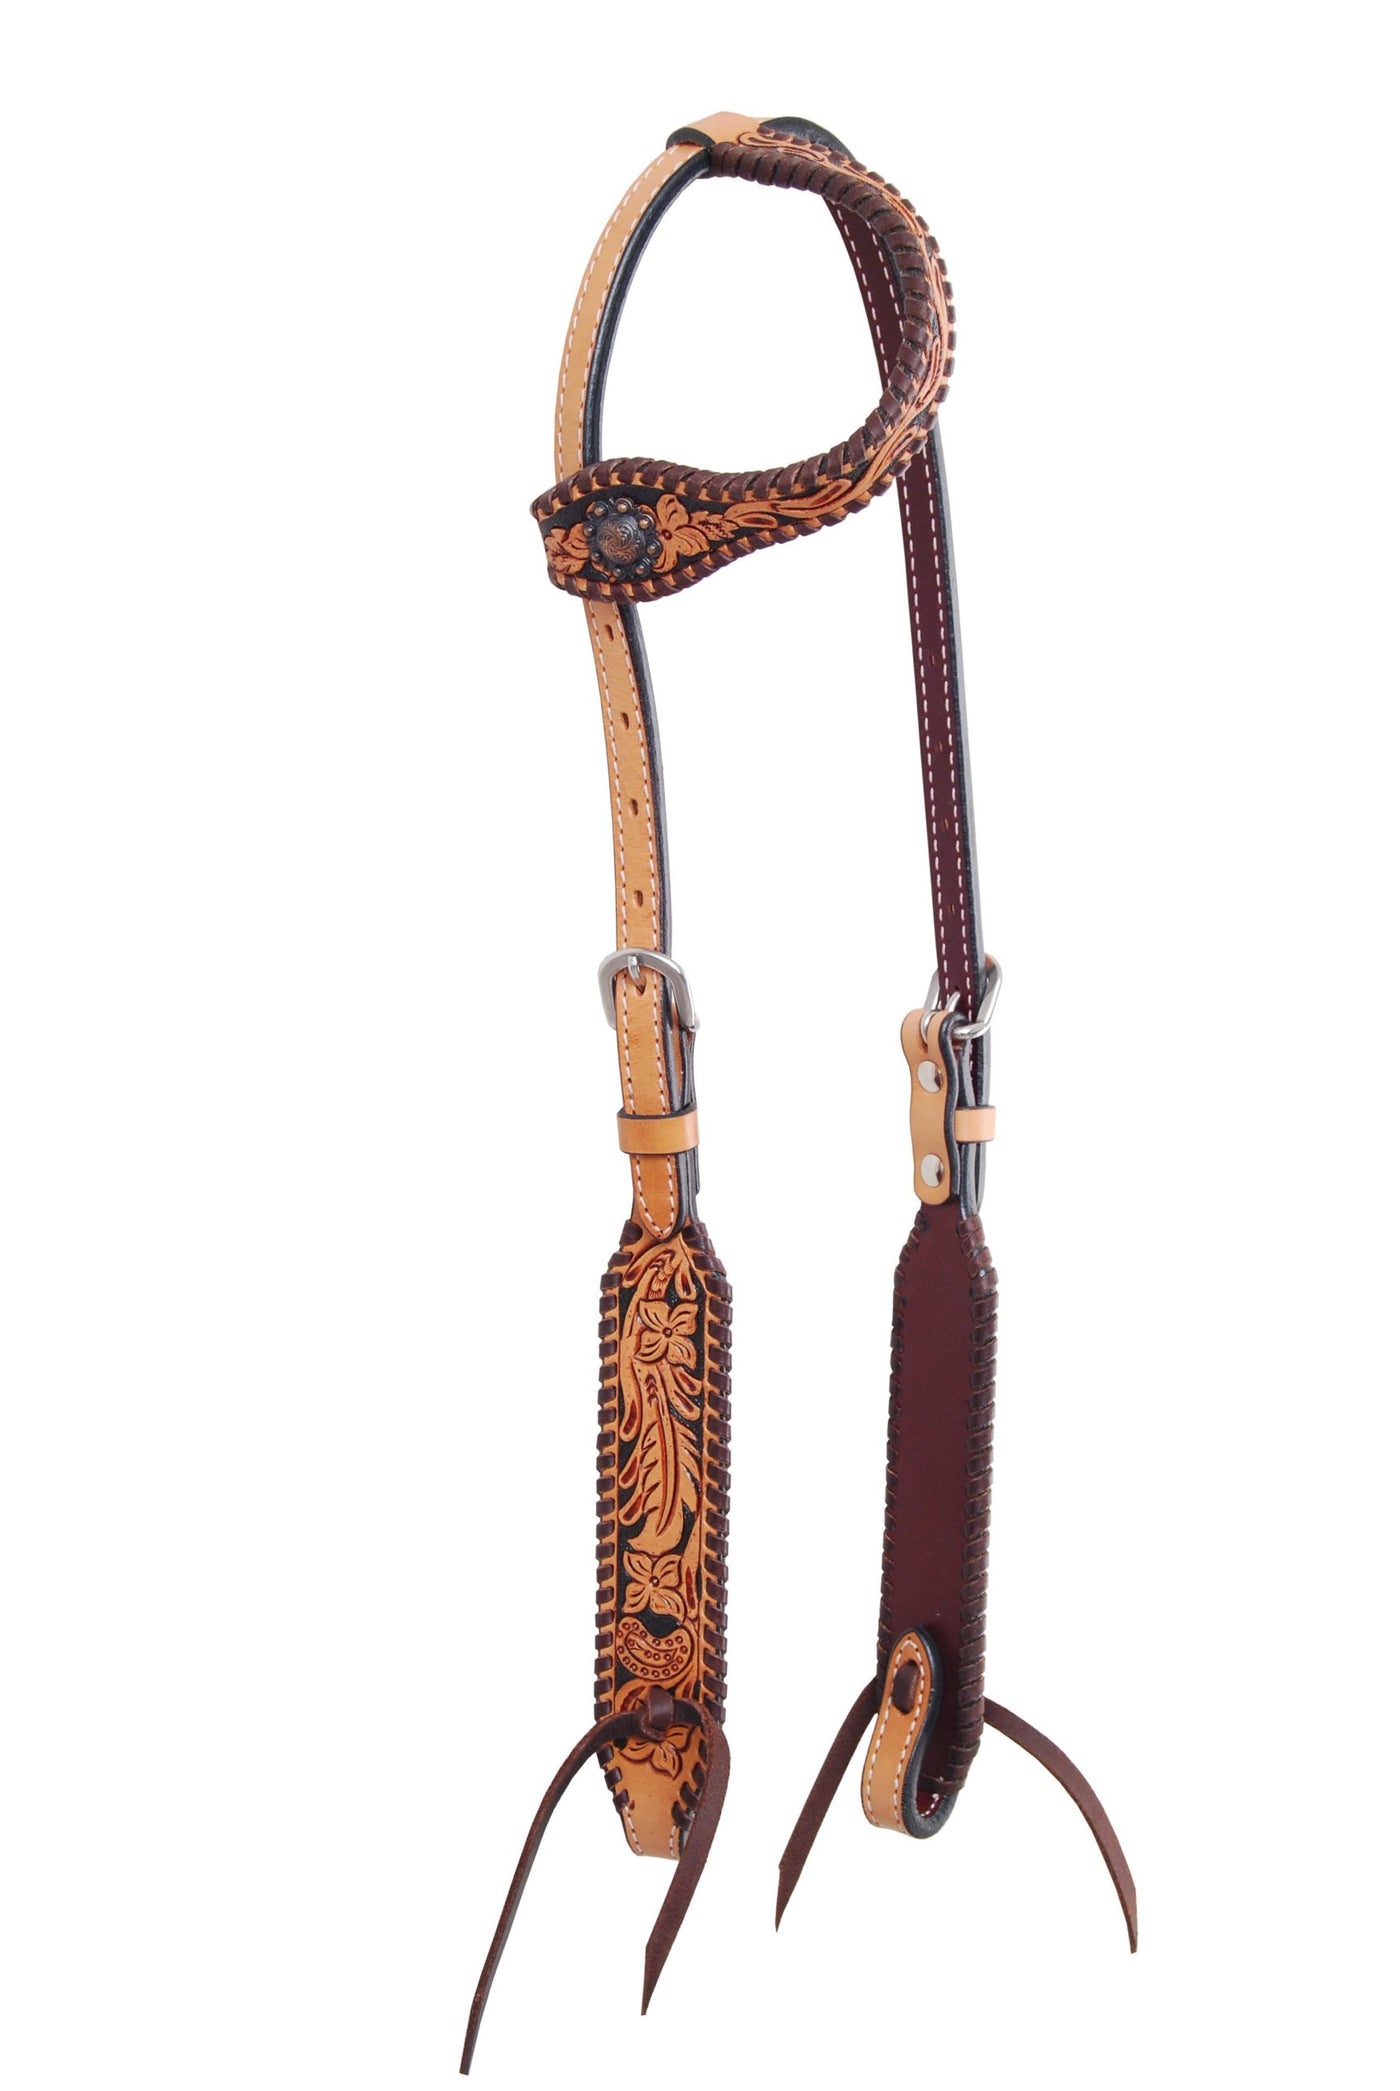 Rafter T Ranch Floral Tooled Single Ear Headstall